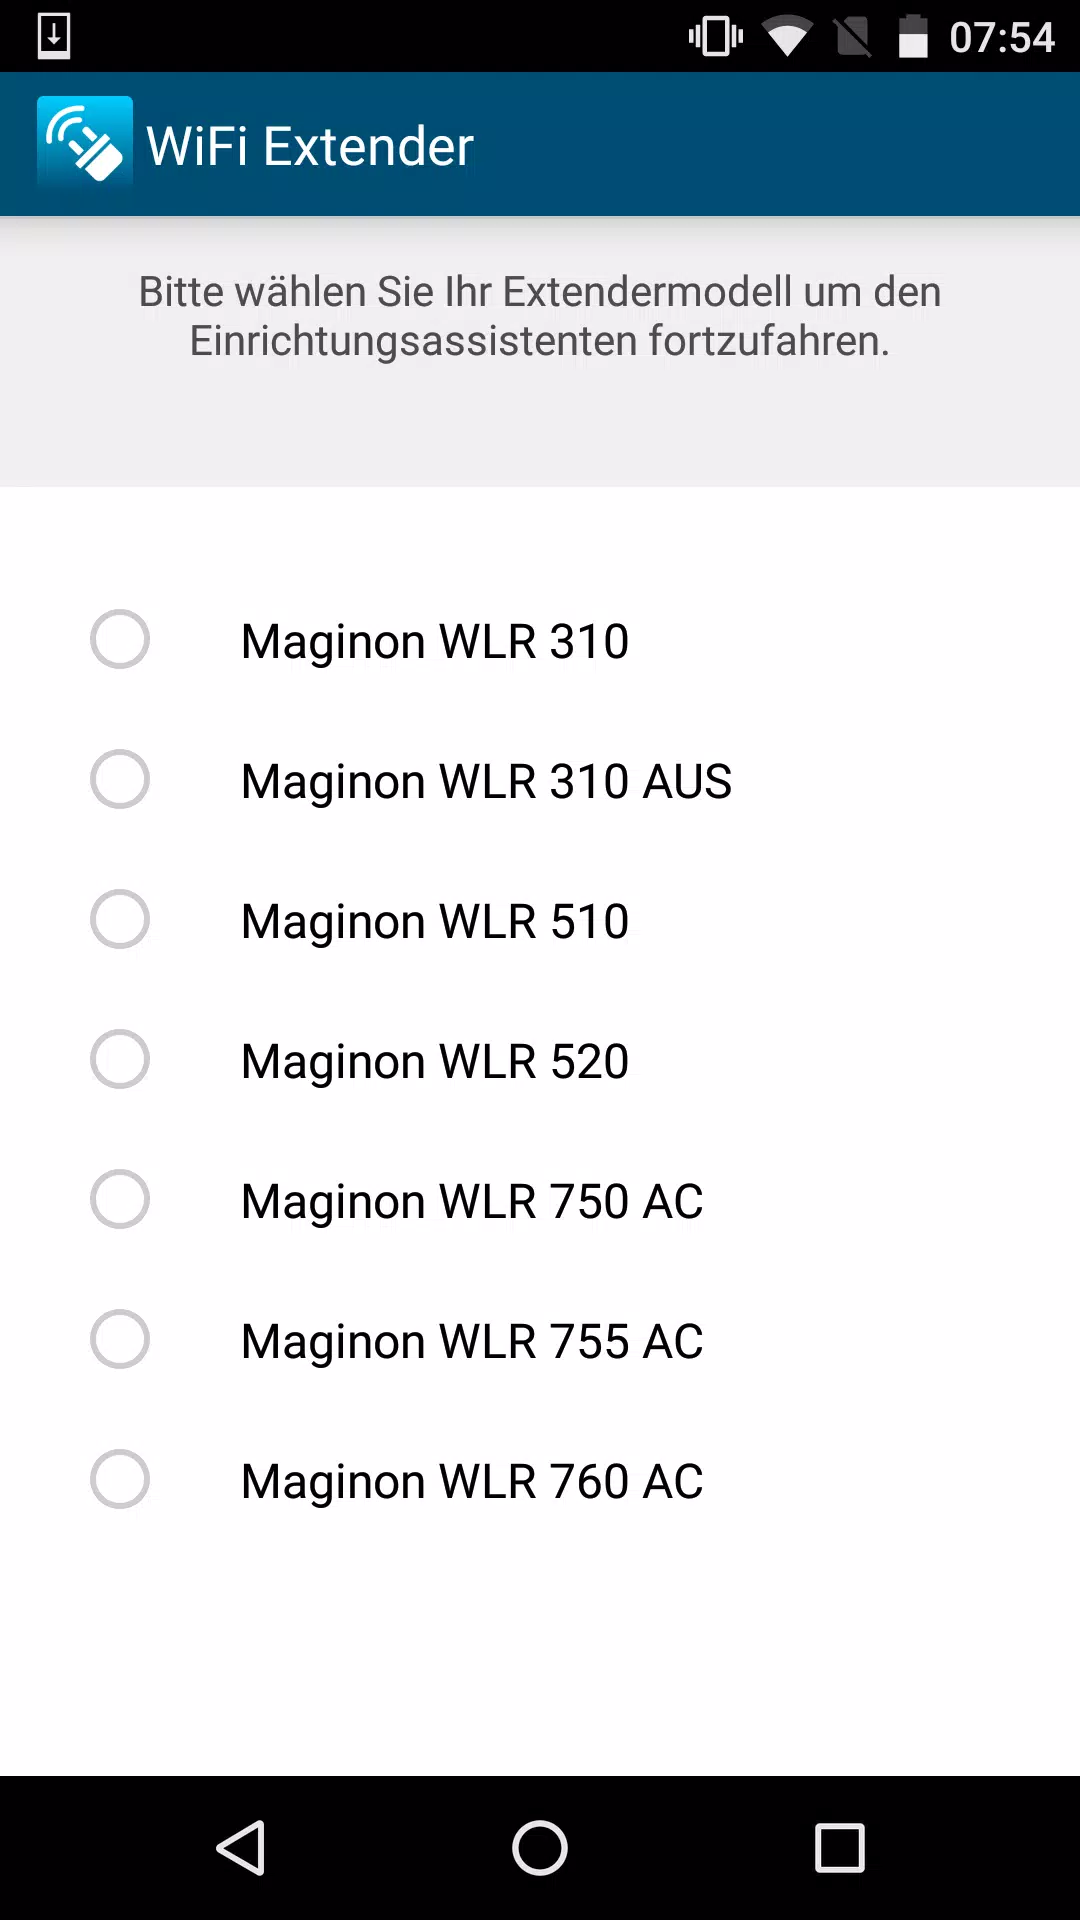 Maginon WiFi Extender Android Download